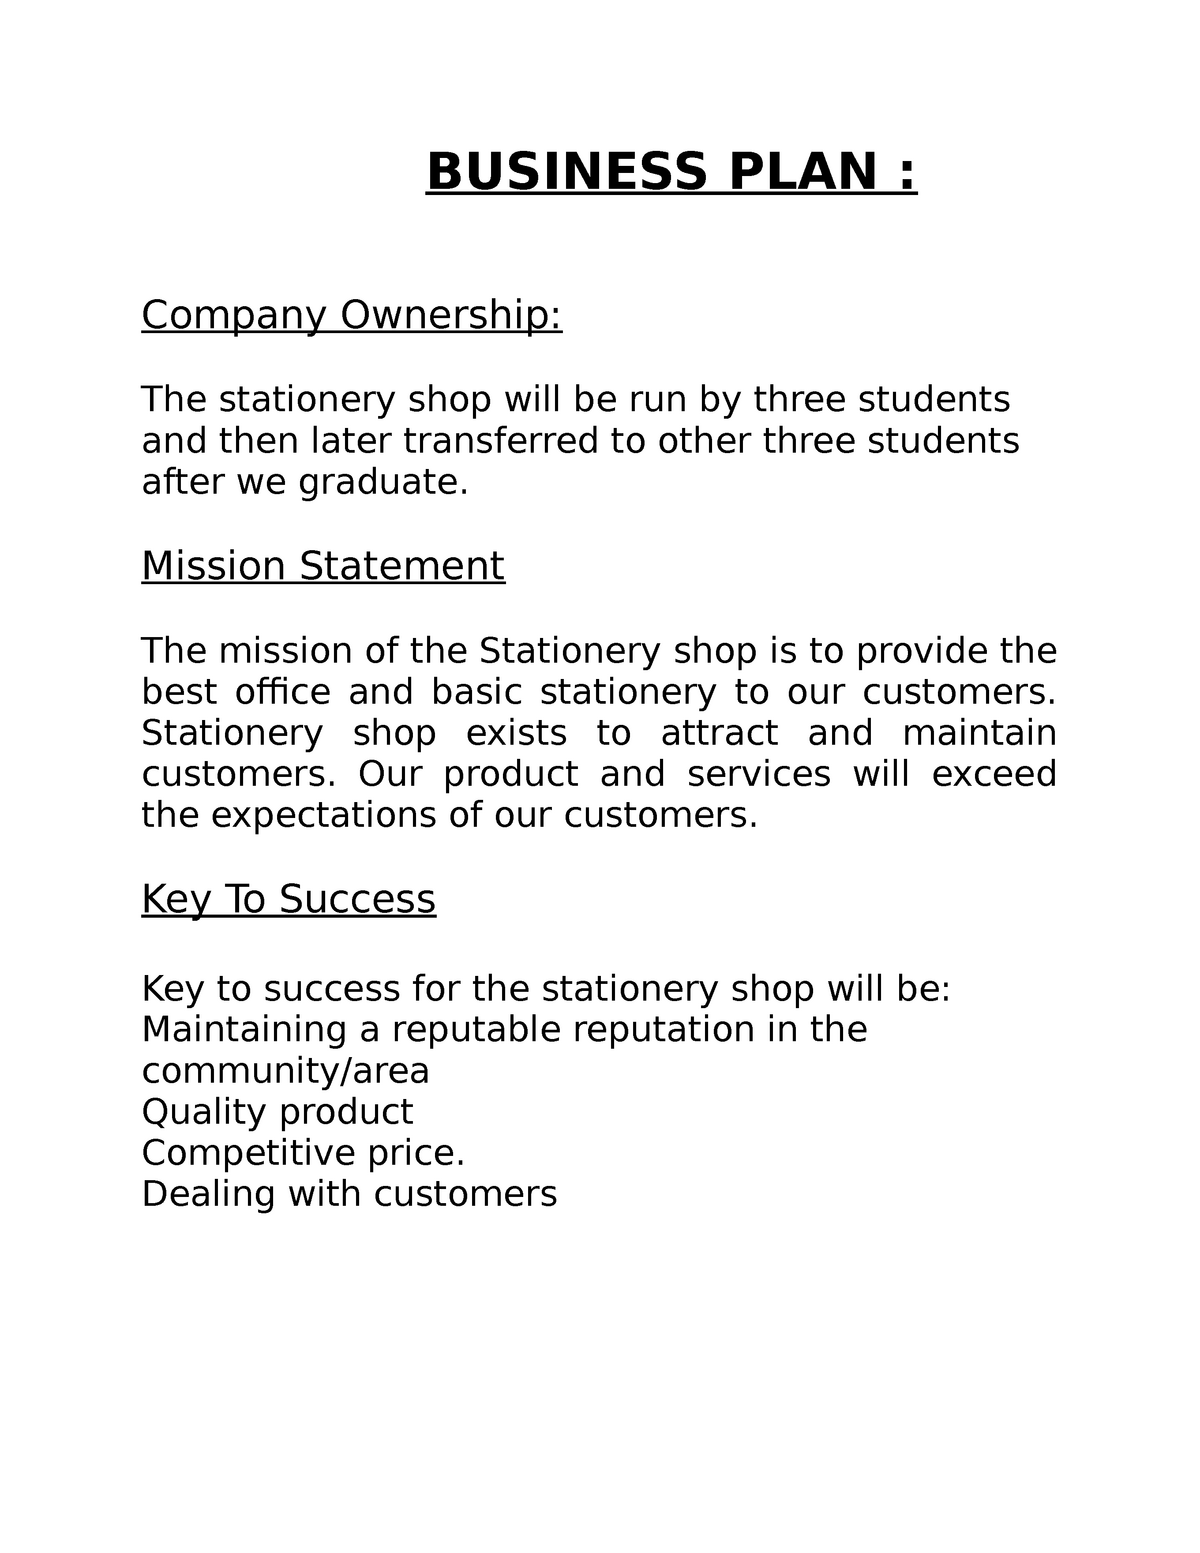 business plan for stationery shop